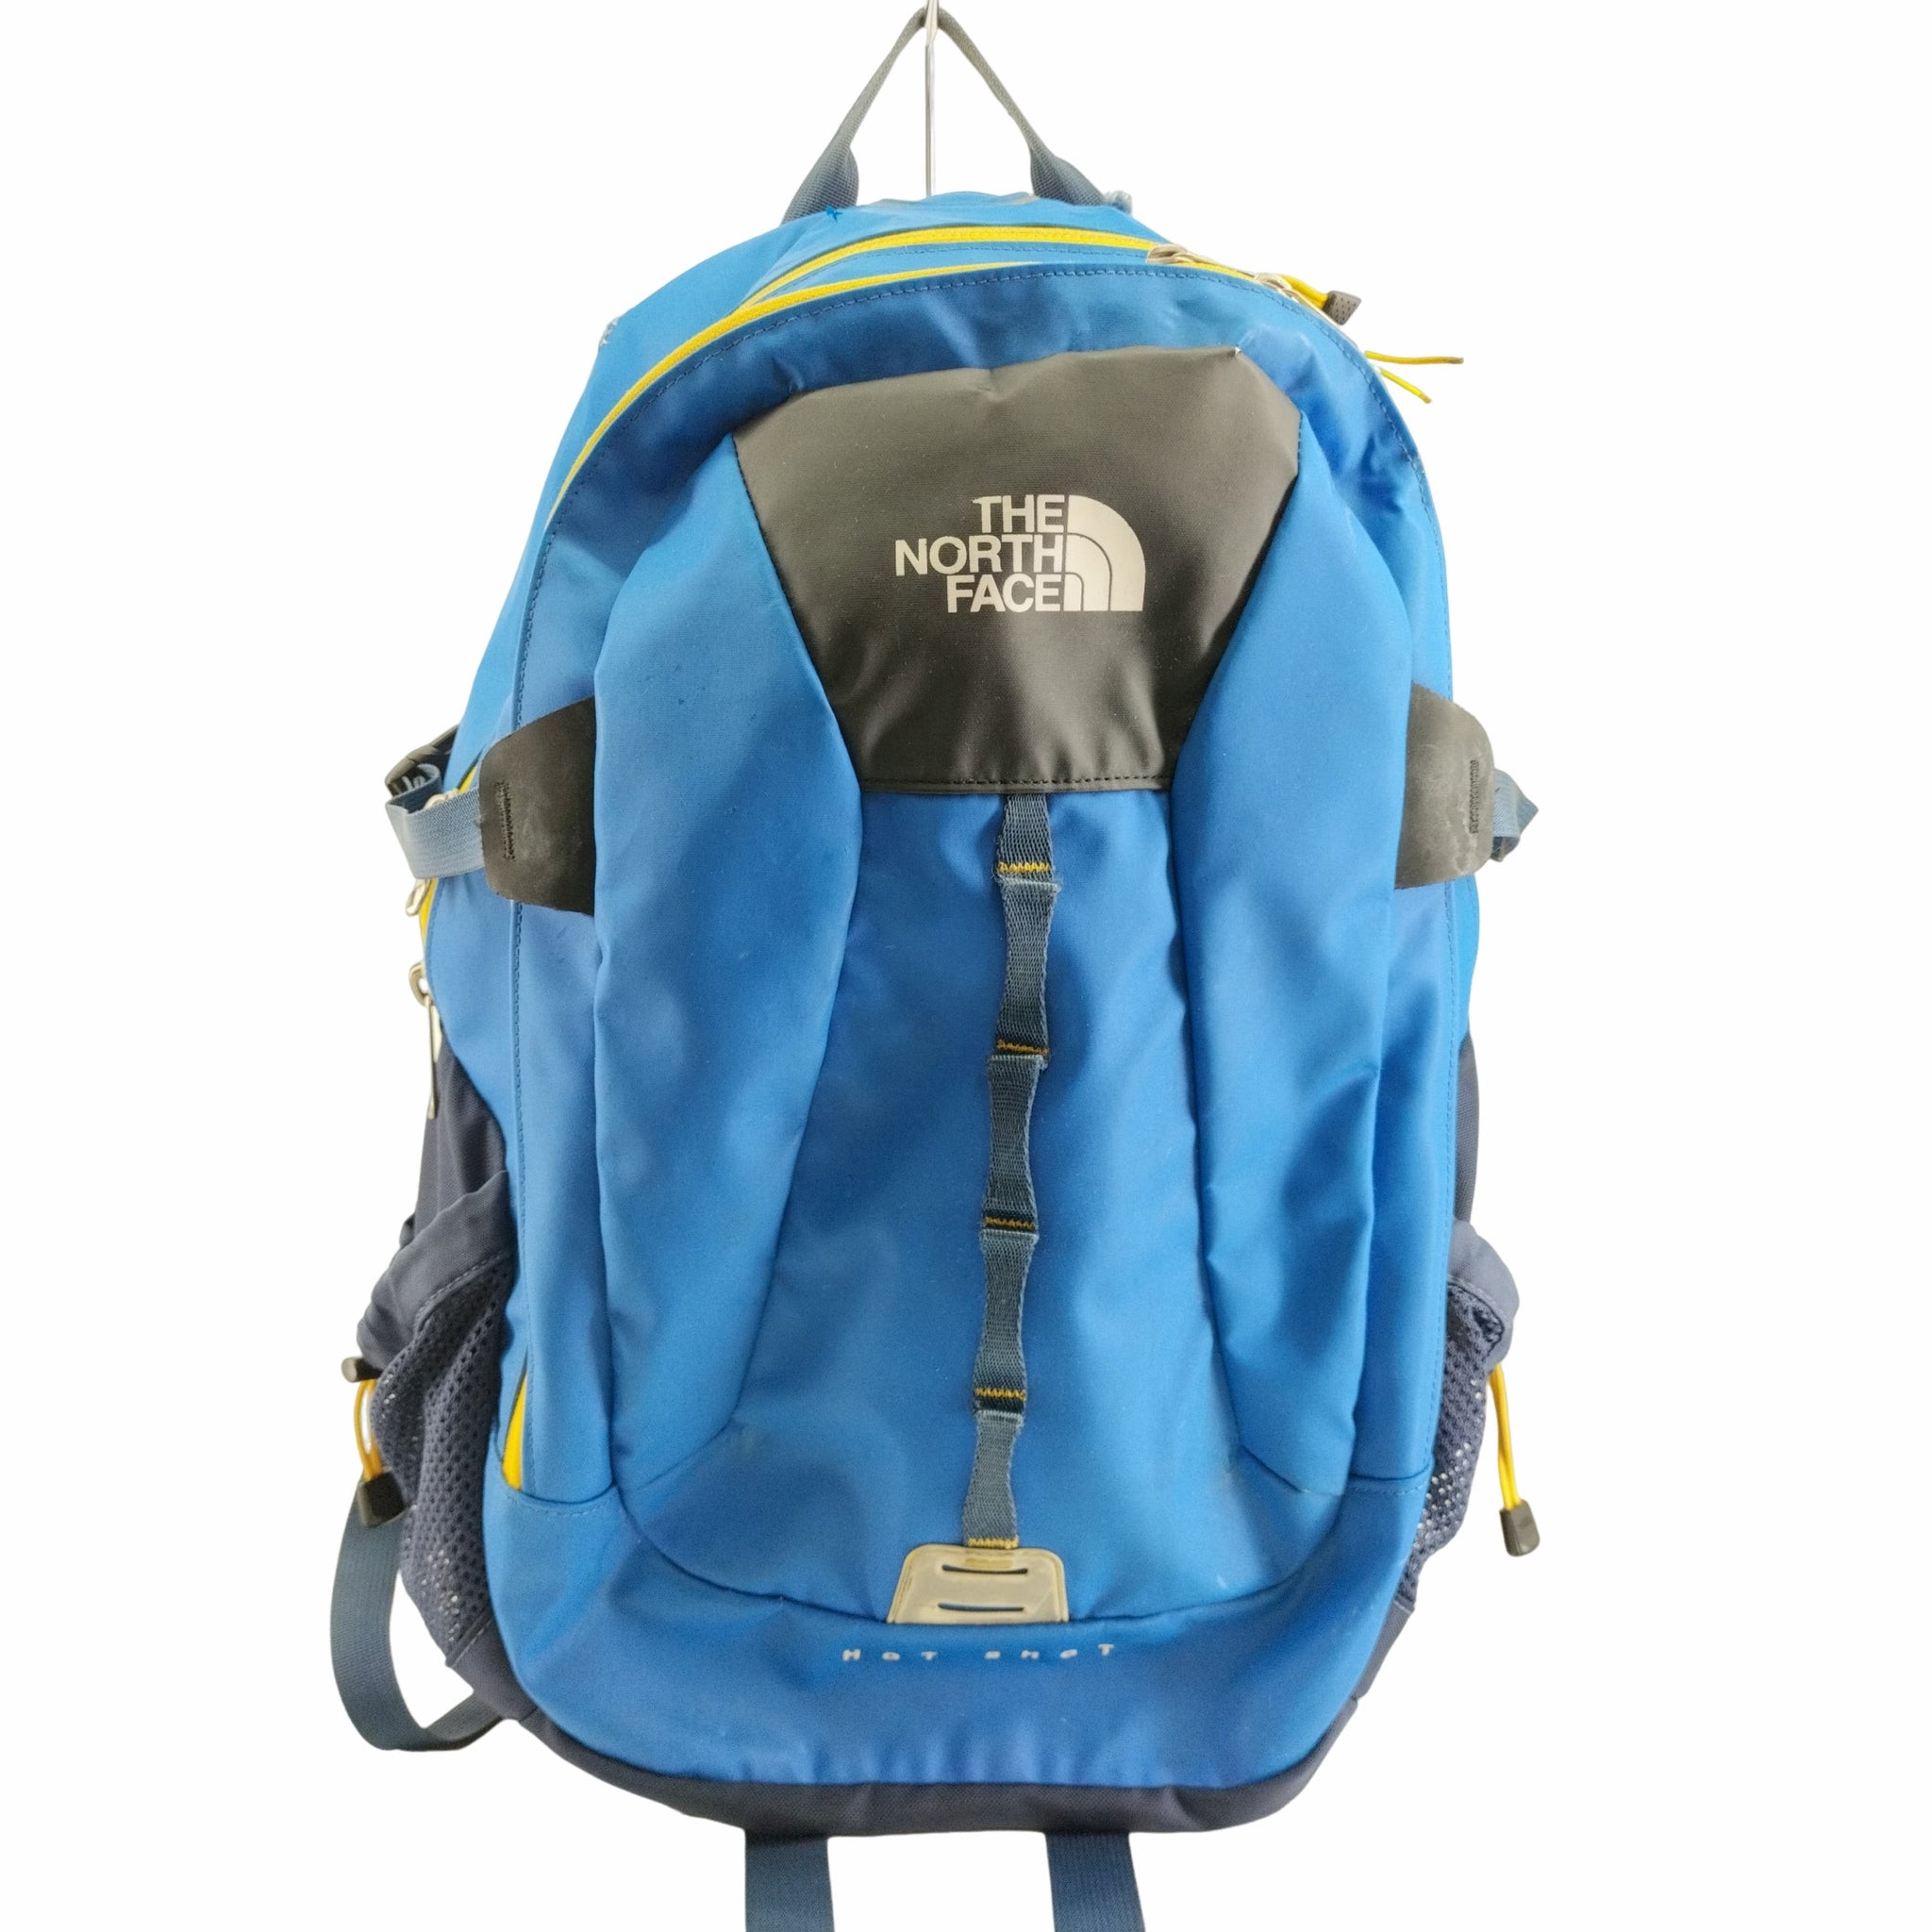 THE NORTH FACE(ザノースフェイス)HOT SHOT BACKPACK ブルー イエロー